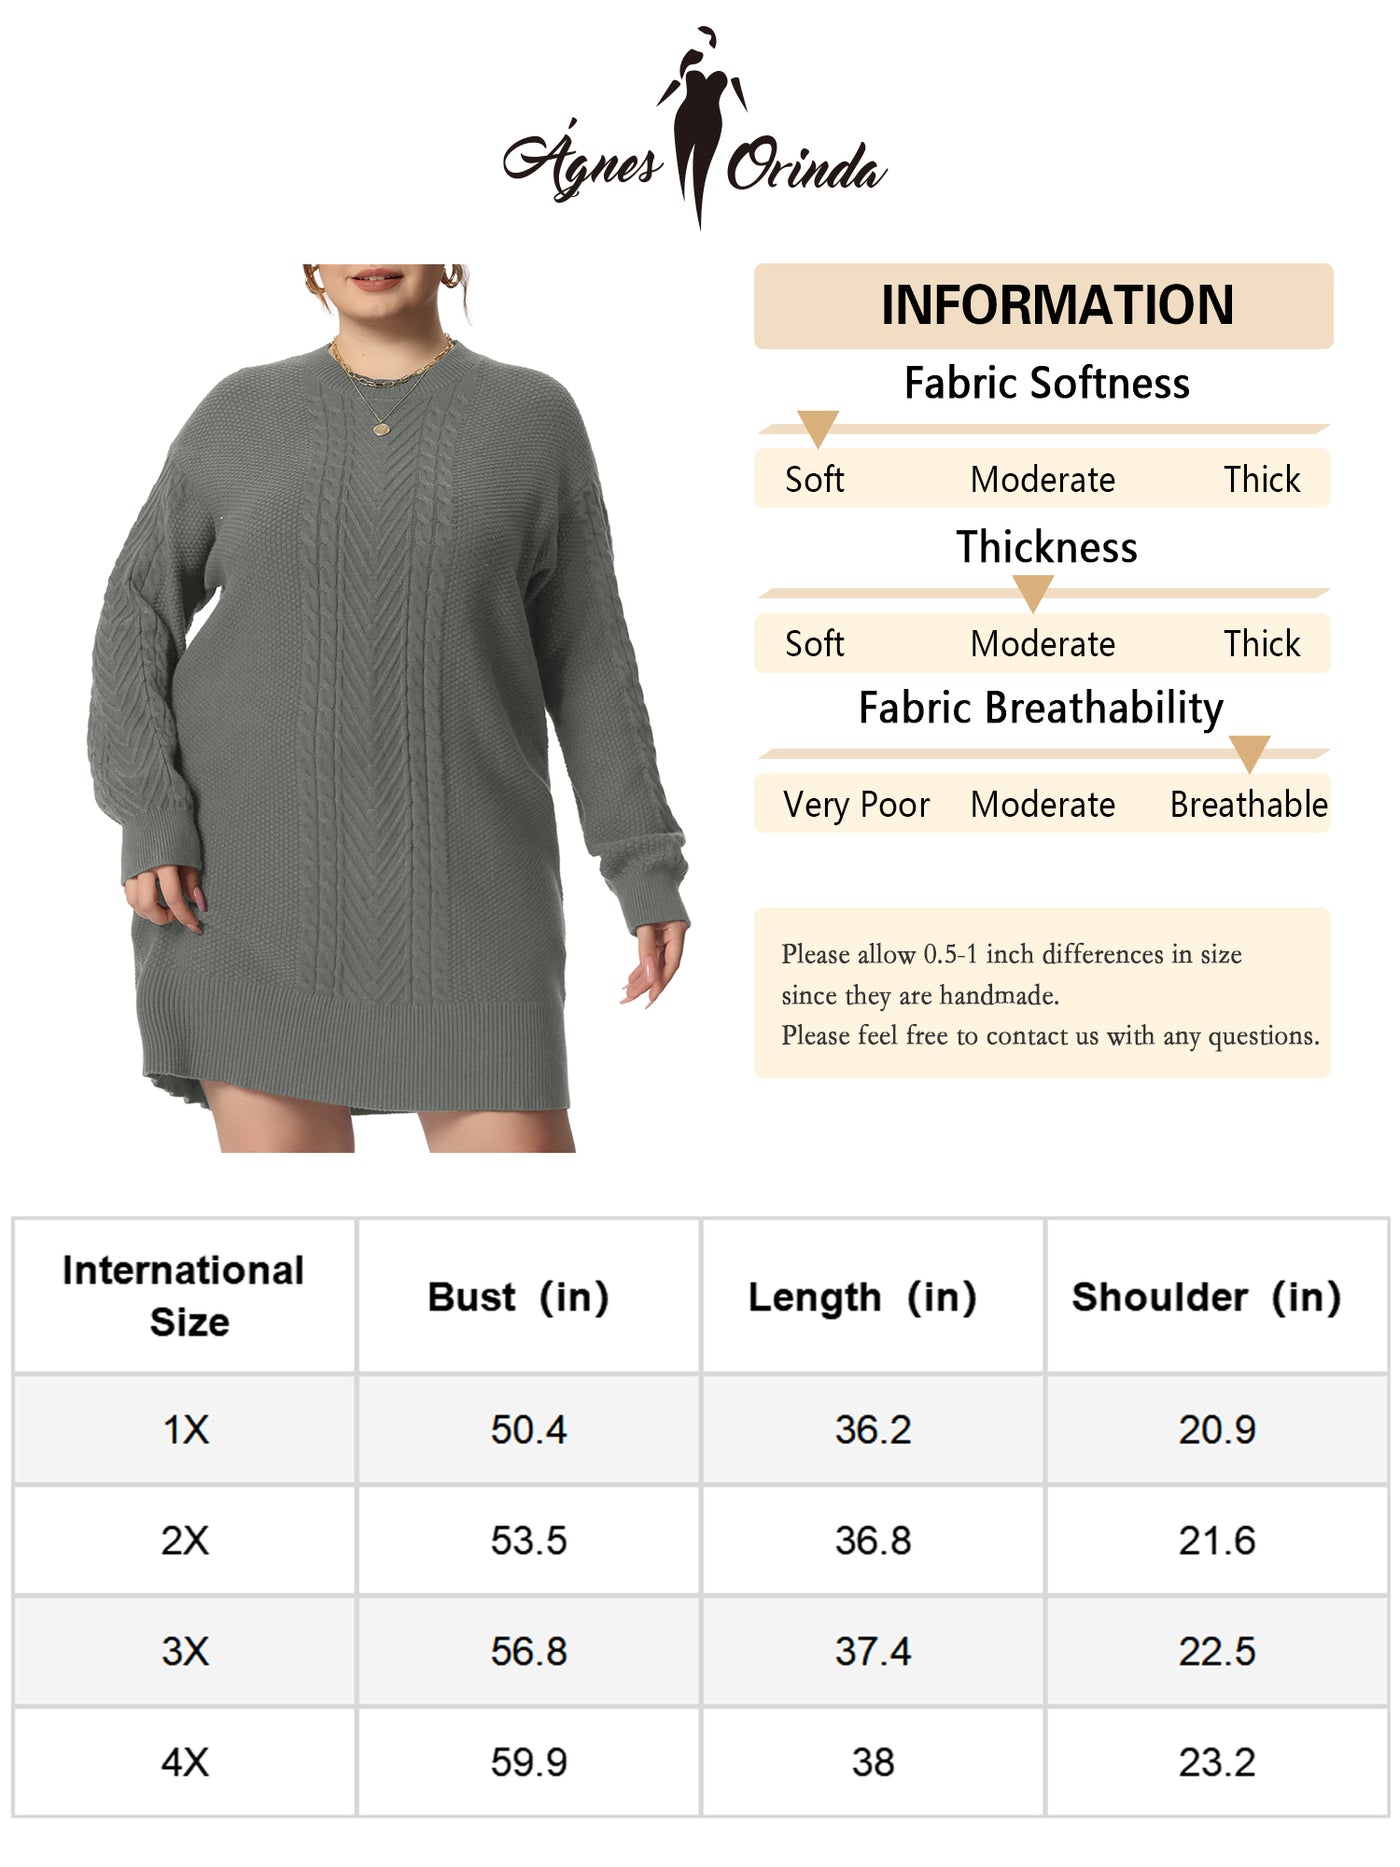 Bublédon H Line Cable Round Neck Long Sleeve Sweater Dress